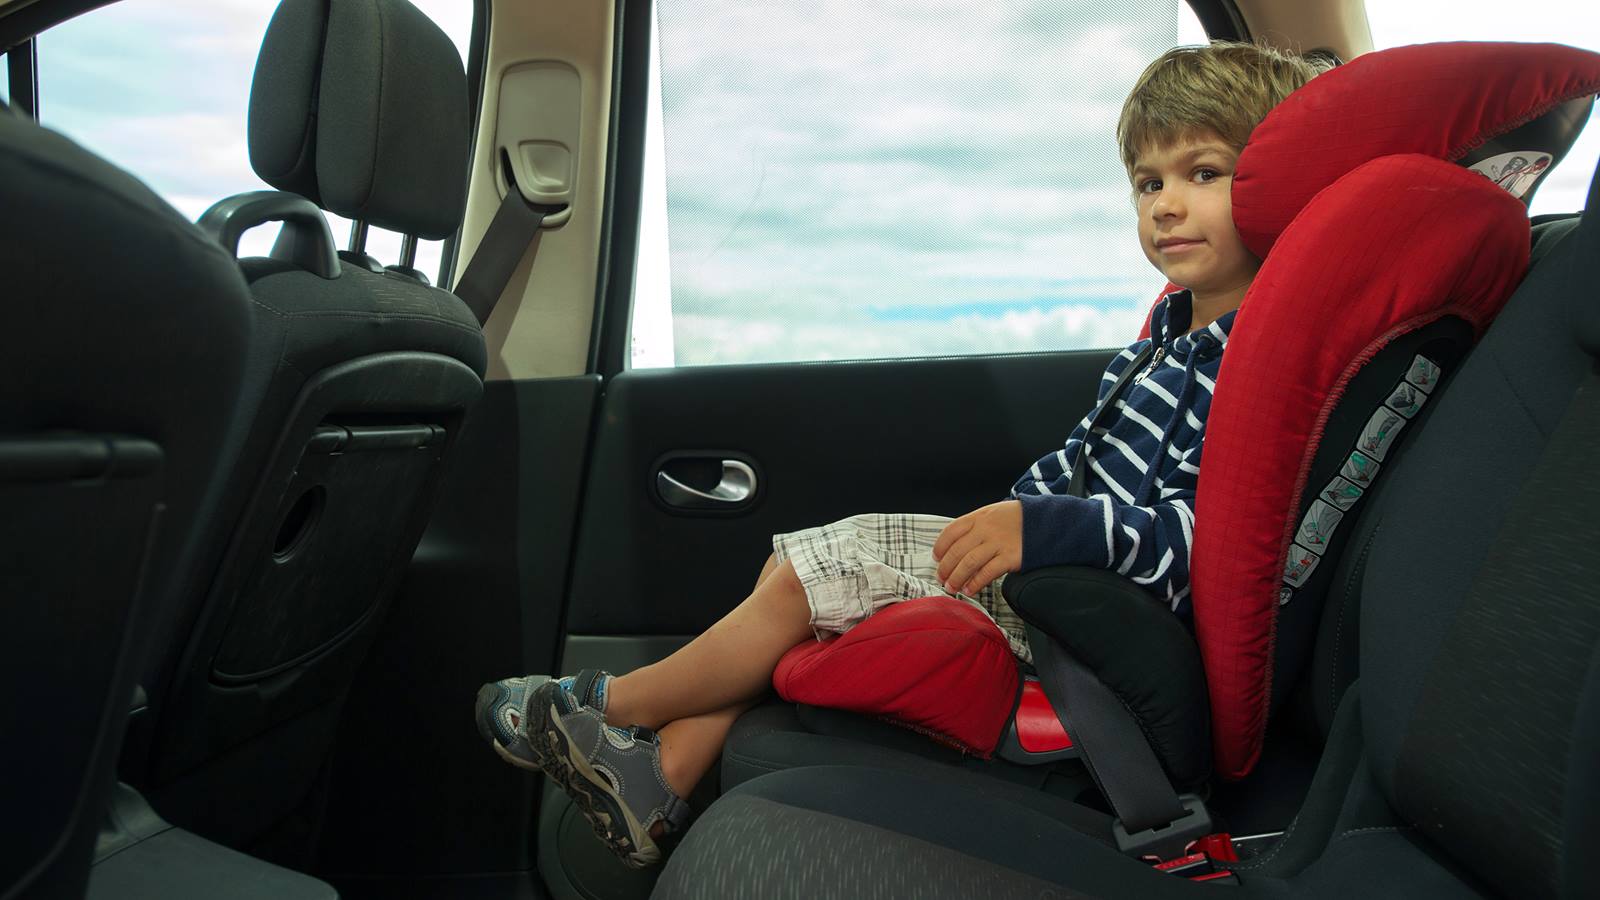 Child Ready To Move Into A Booster Seat, Is A Backless Booster Seat Safe For 4 Year Old